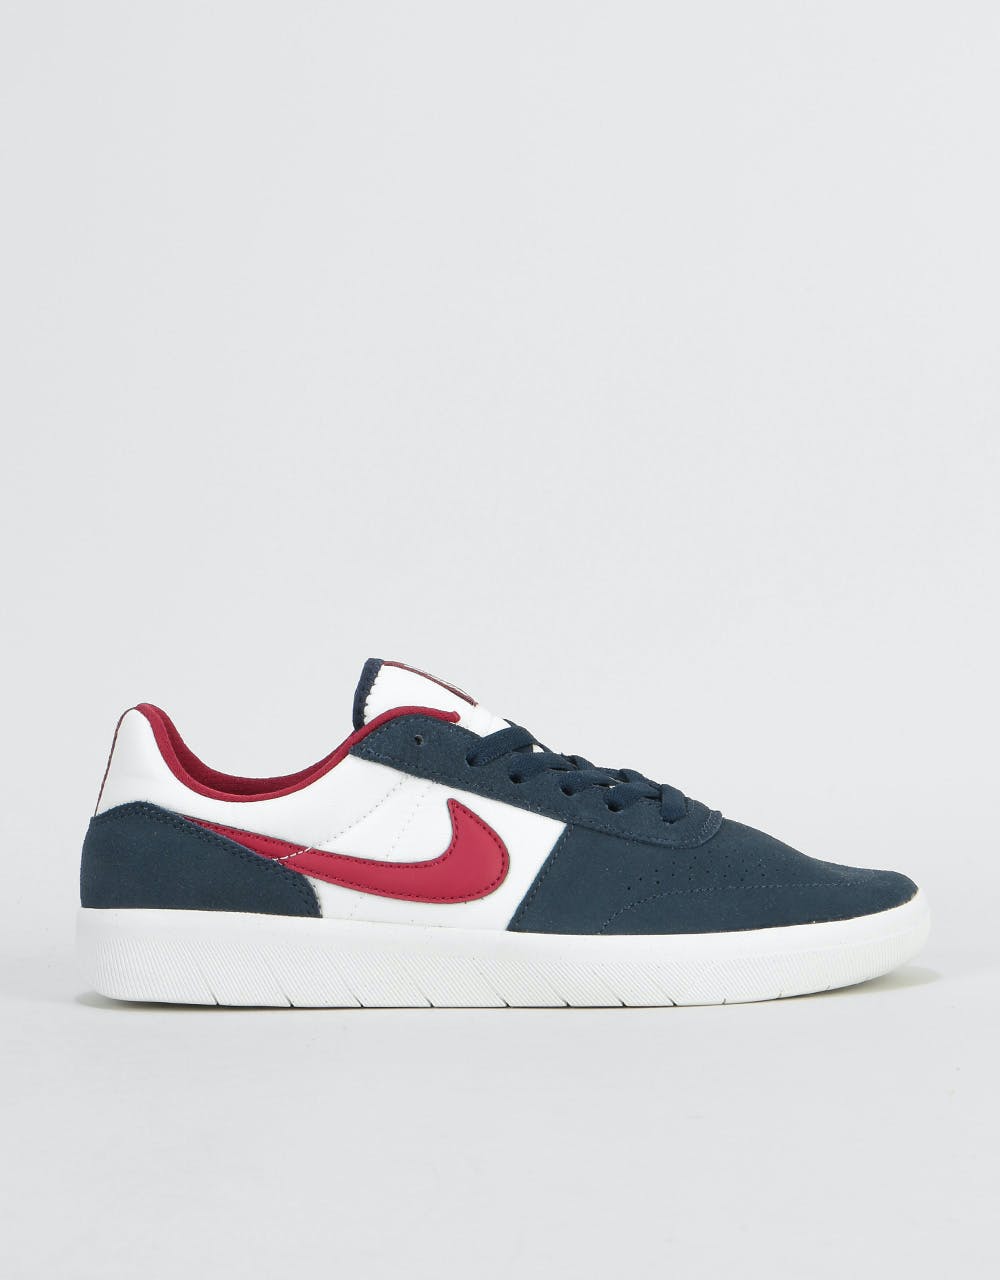 Nike SB Team Classic Skate Shoes - Obsidian/Team Red-Summit White – Route  One